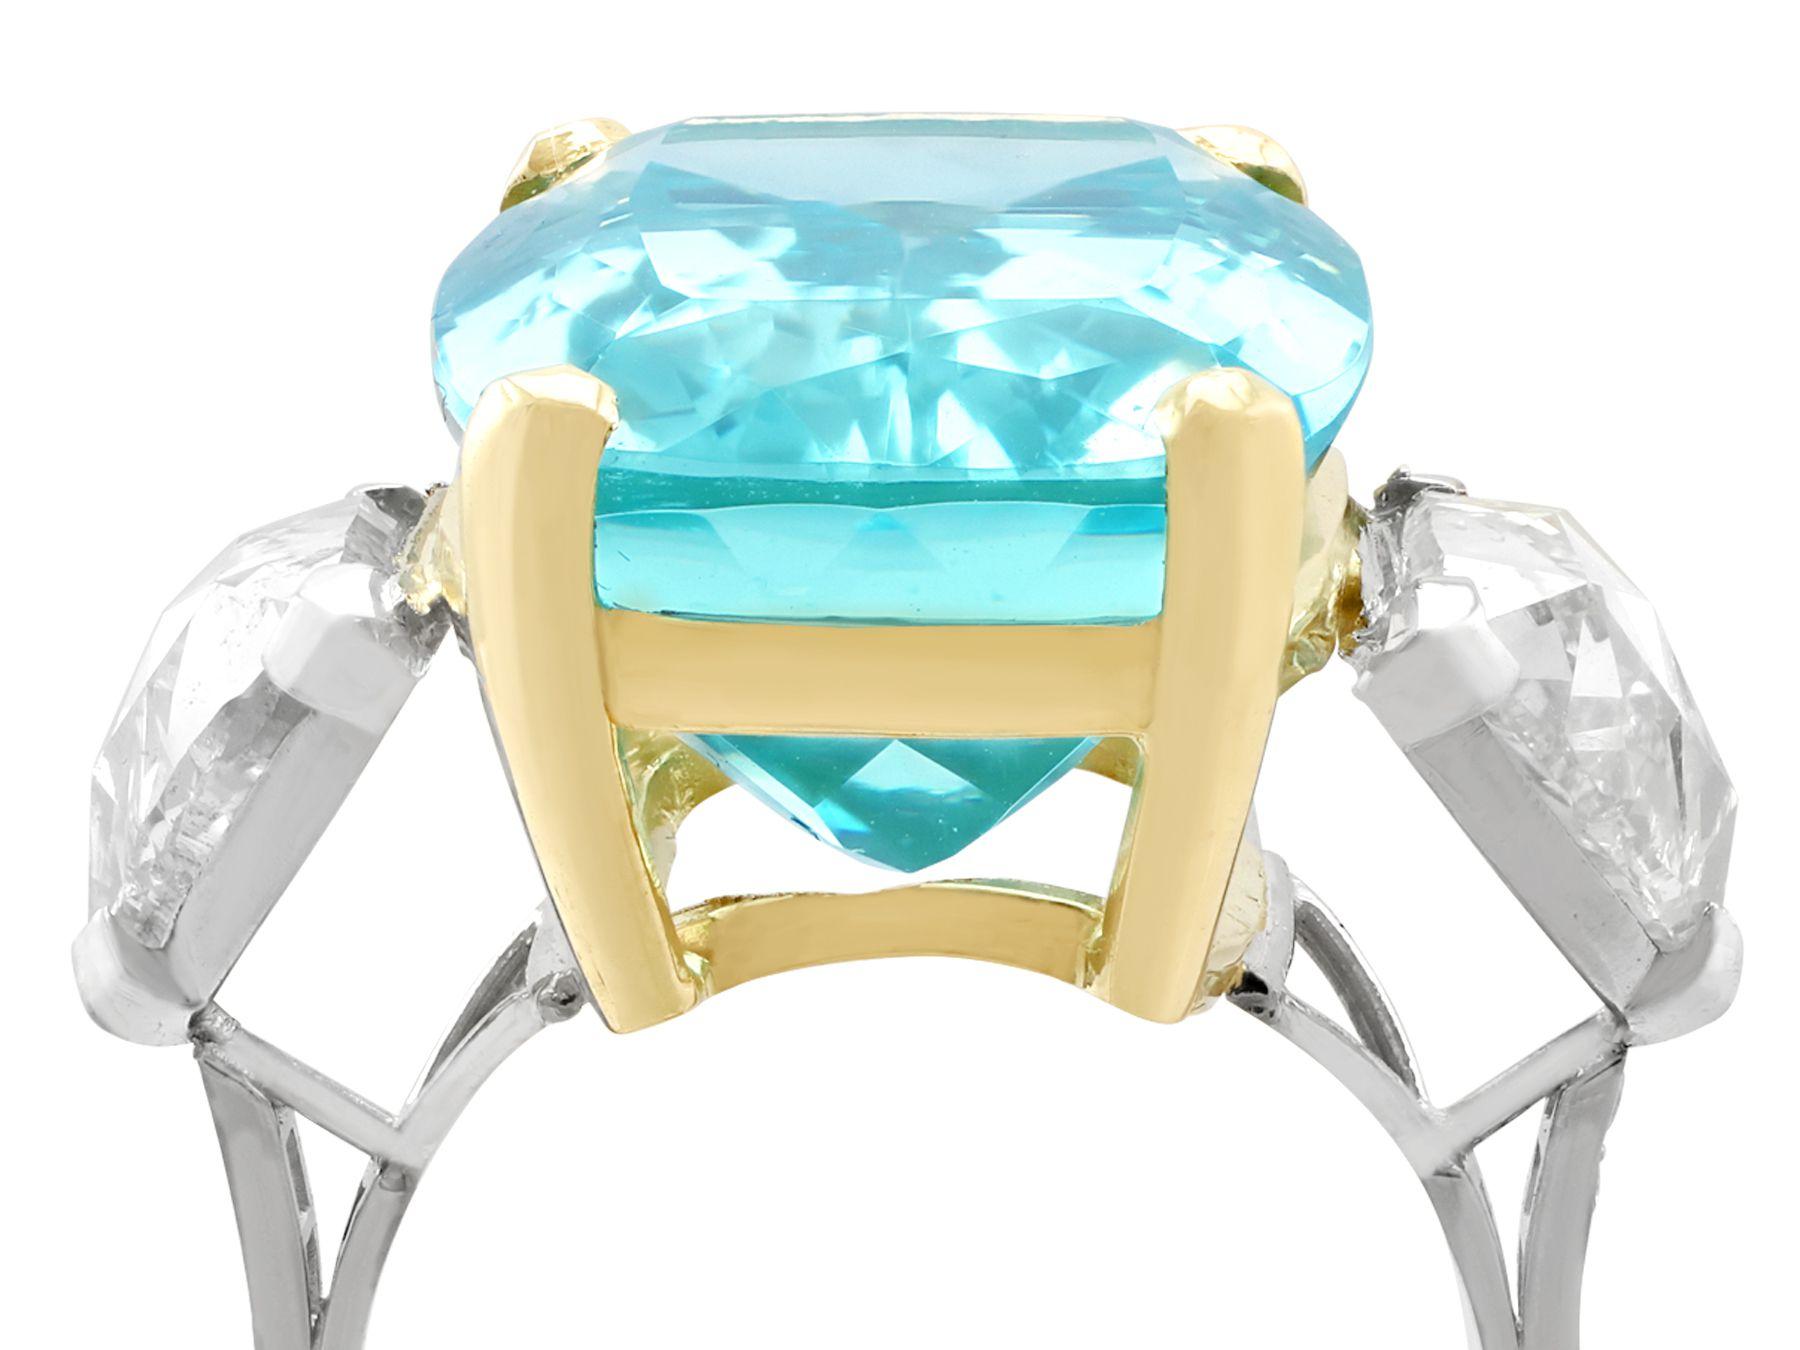 A stunning vintage 25.23 carat aquamarine and 3.40 carat diamond, 18 karat yellow gold and platinum dress ring; part of our diverse vintage jewelry and estate jewelry collections

This stunning, fine and impressive vintage aquamarine ring has been